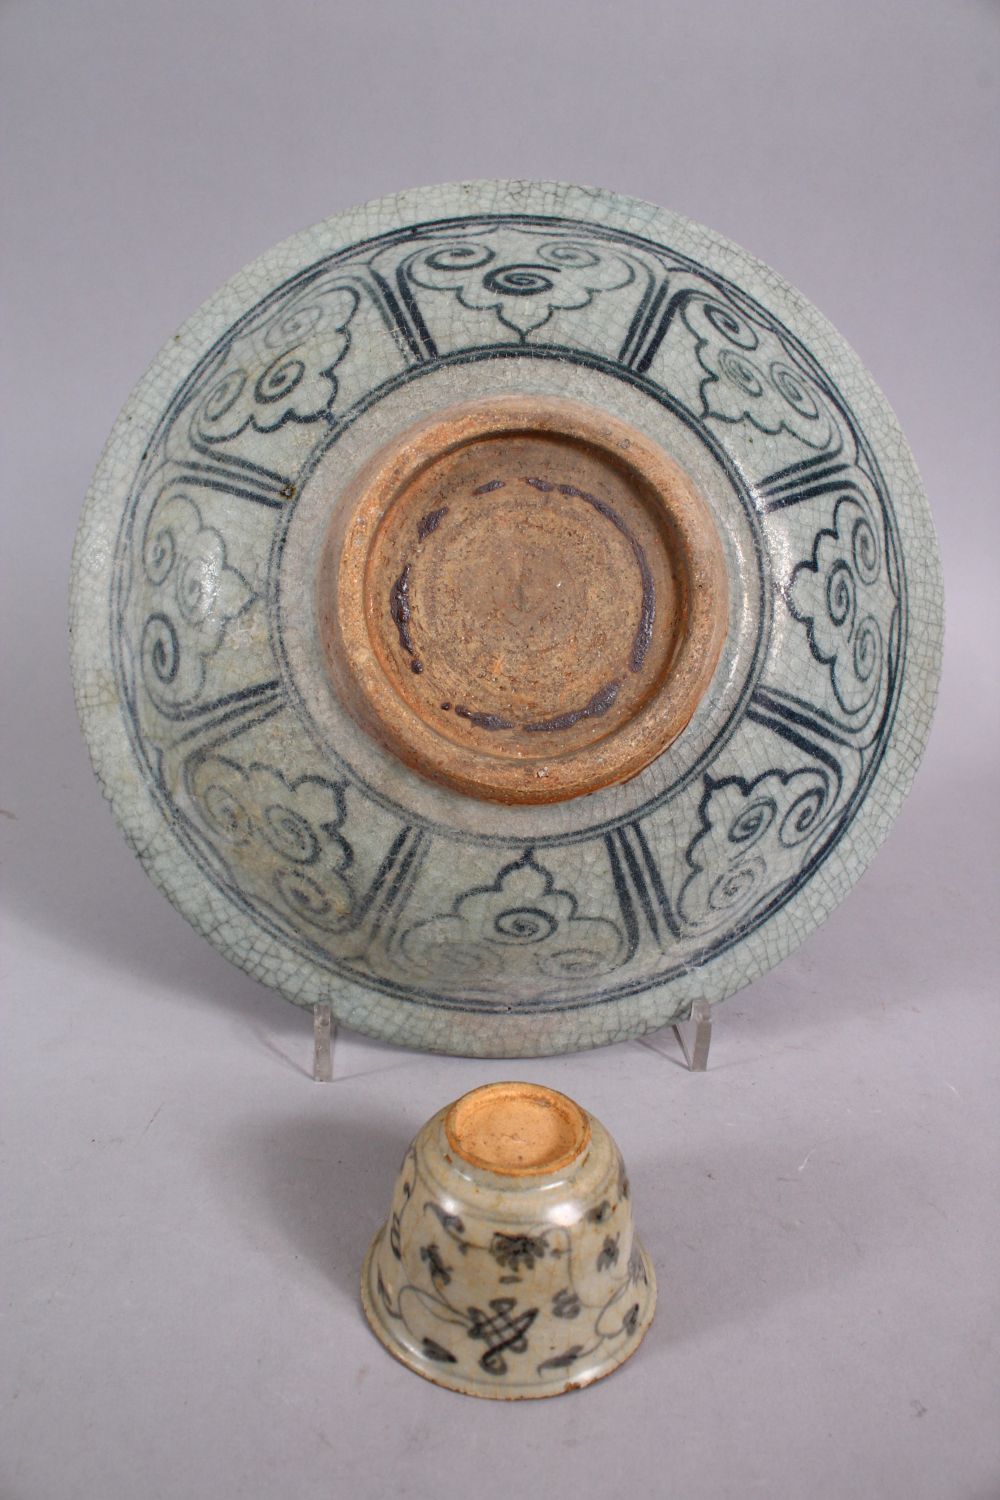 A GOOD 15TH / 16TH CENTURY SUKHOTHAI EARTHENWARE BLUE & WHITE PLATE & A SMALL MING DYNASTY TEA BOWL, - Image 6 of 6